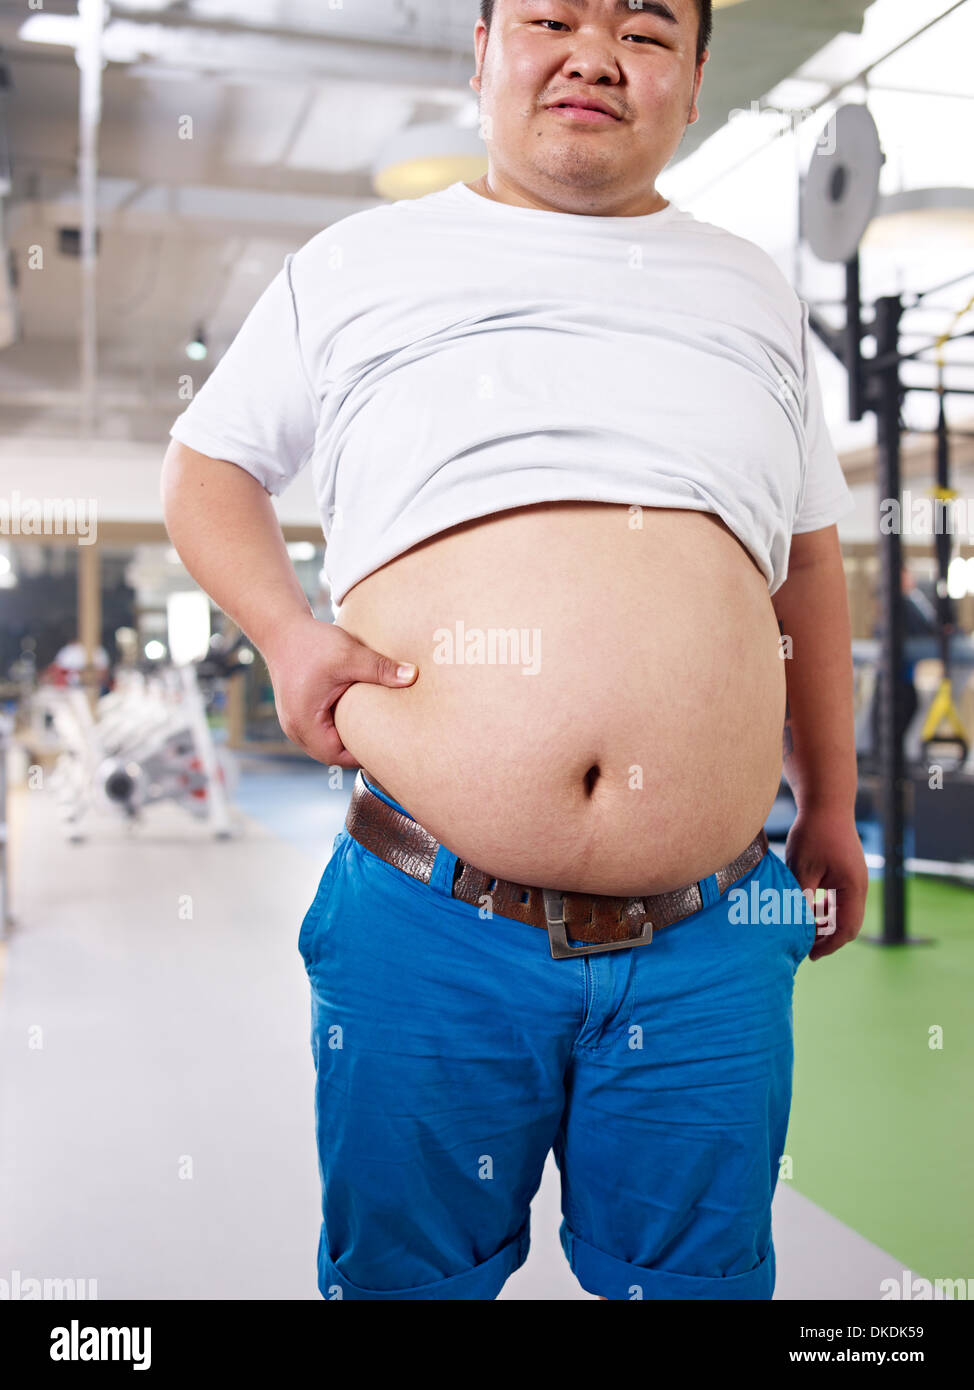 portrait of an overweight man Stock Photo